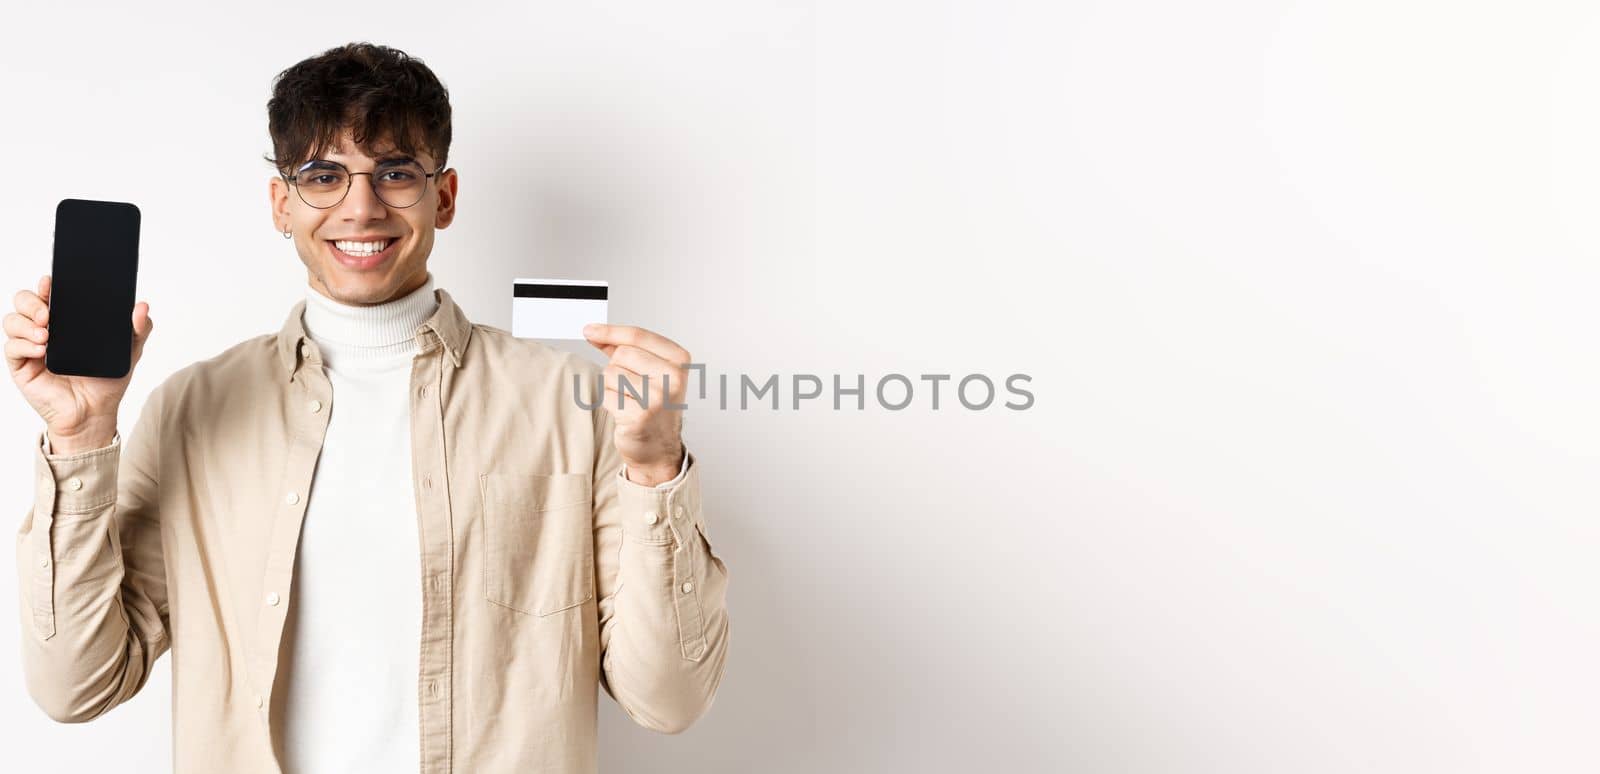 Online shopping. Natural guy in glasses showing empty smartphone screen and plastic credit card, smiling pleased, recommending bank, standing on white background.